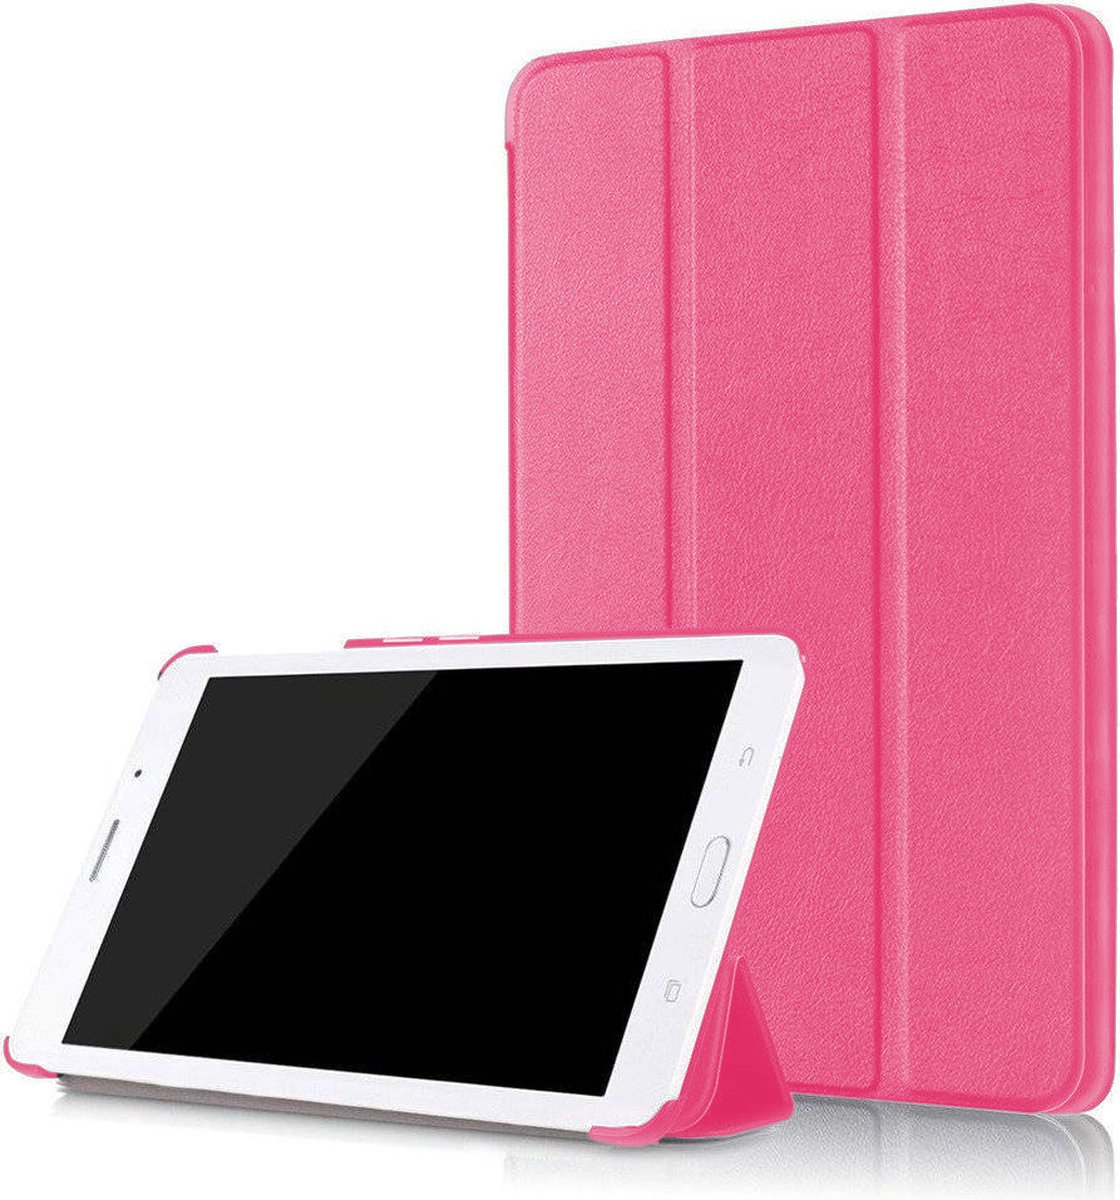 Samsung Tab A 10.1 Inch Hoes Roze Hoesje - Tri Fold Tablet Case - Smart Cover- Magnetische Sluiting - Samsung Galaxy Tab A